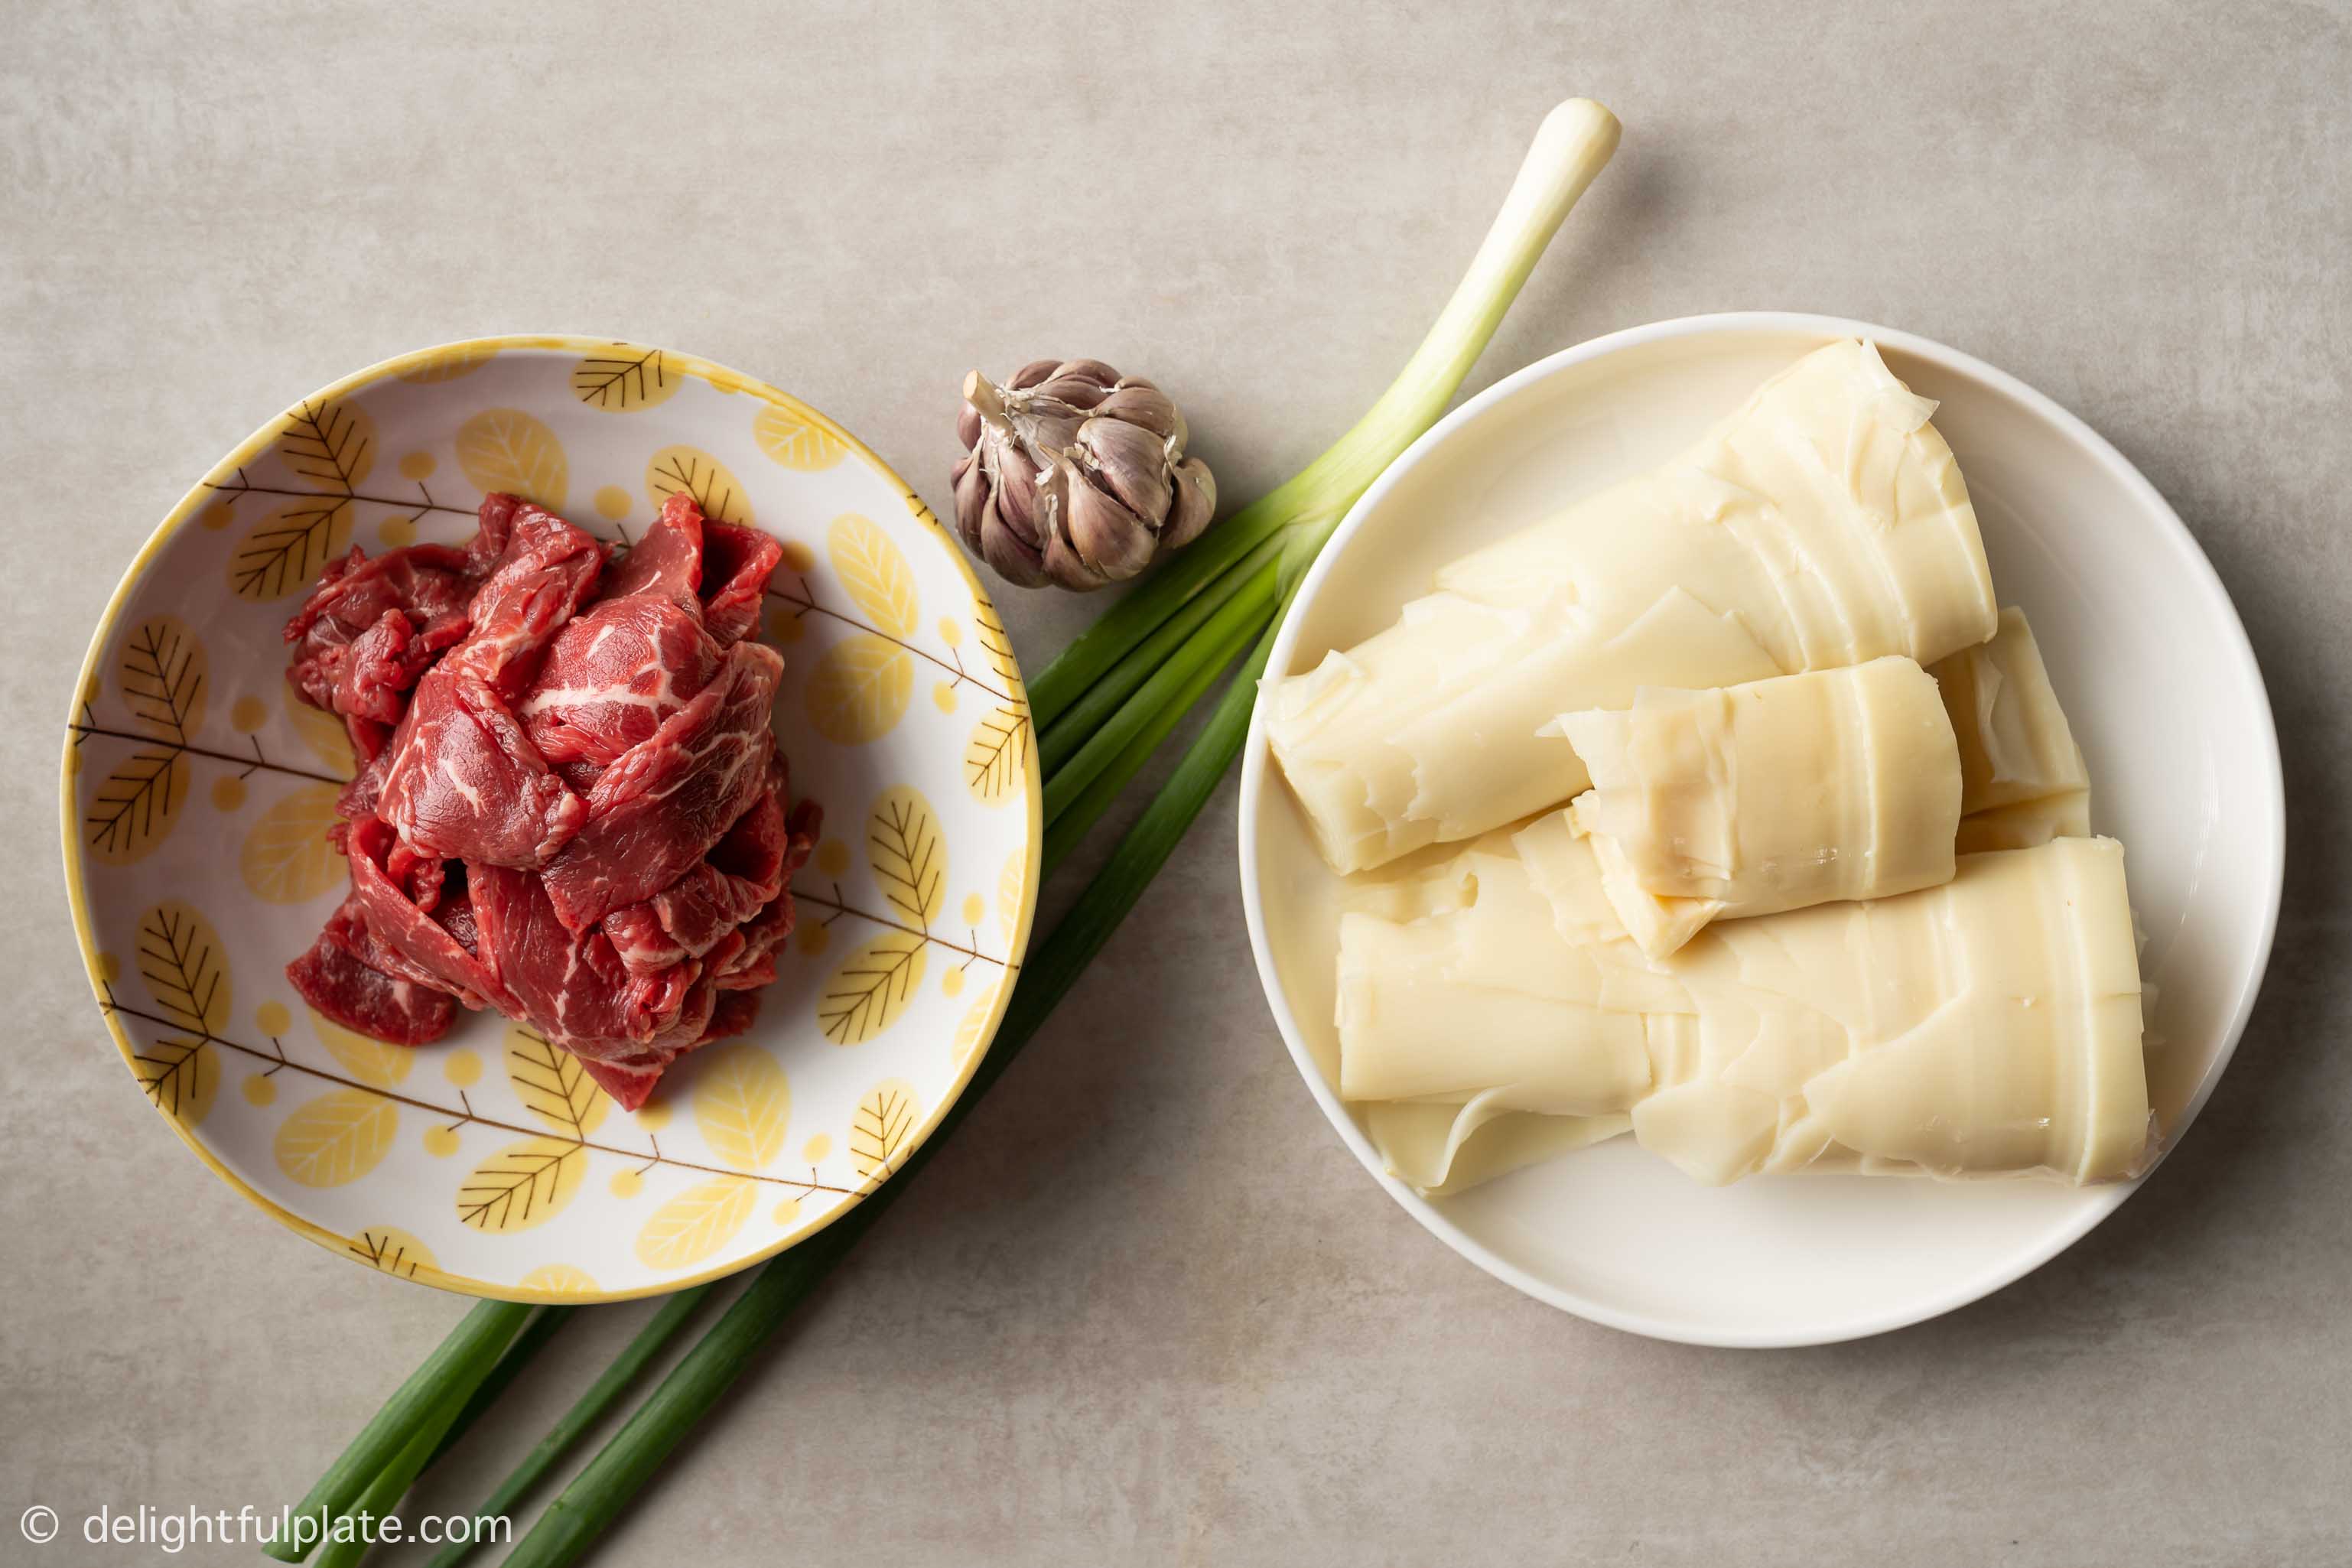 plates containing beef and bamboo shoots